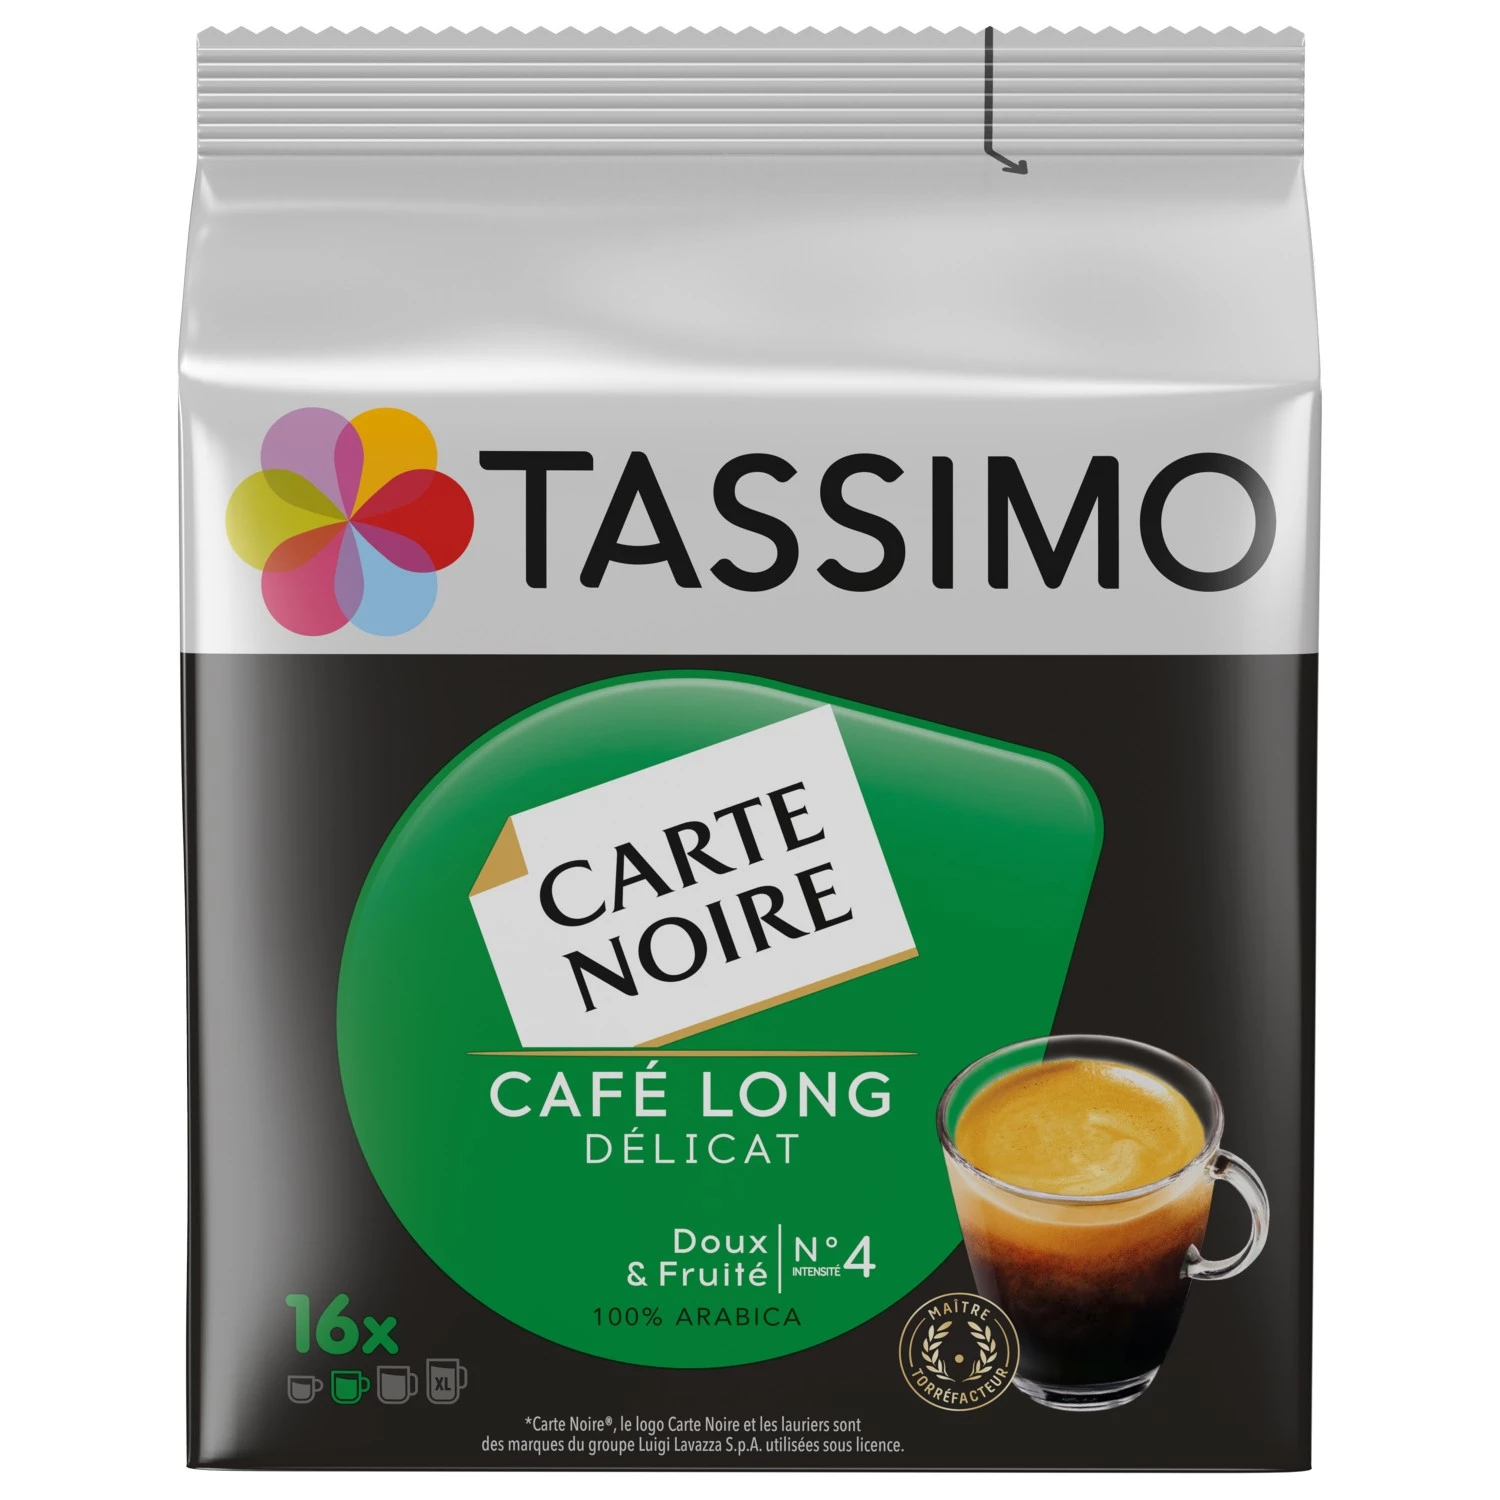 Delicate long coffee black card n°4 x16 pods - TASSIMO